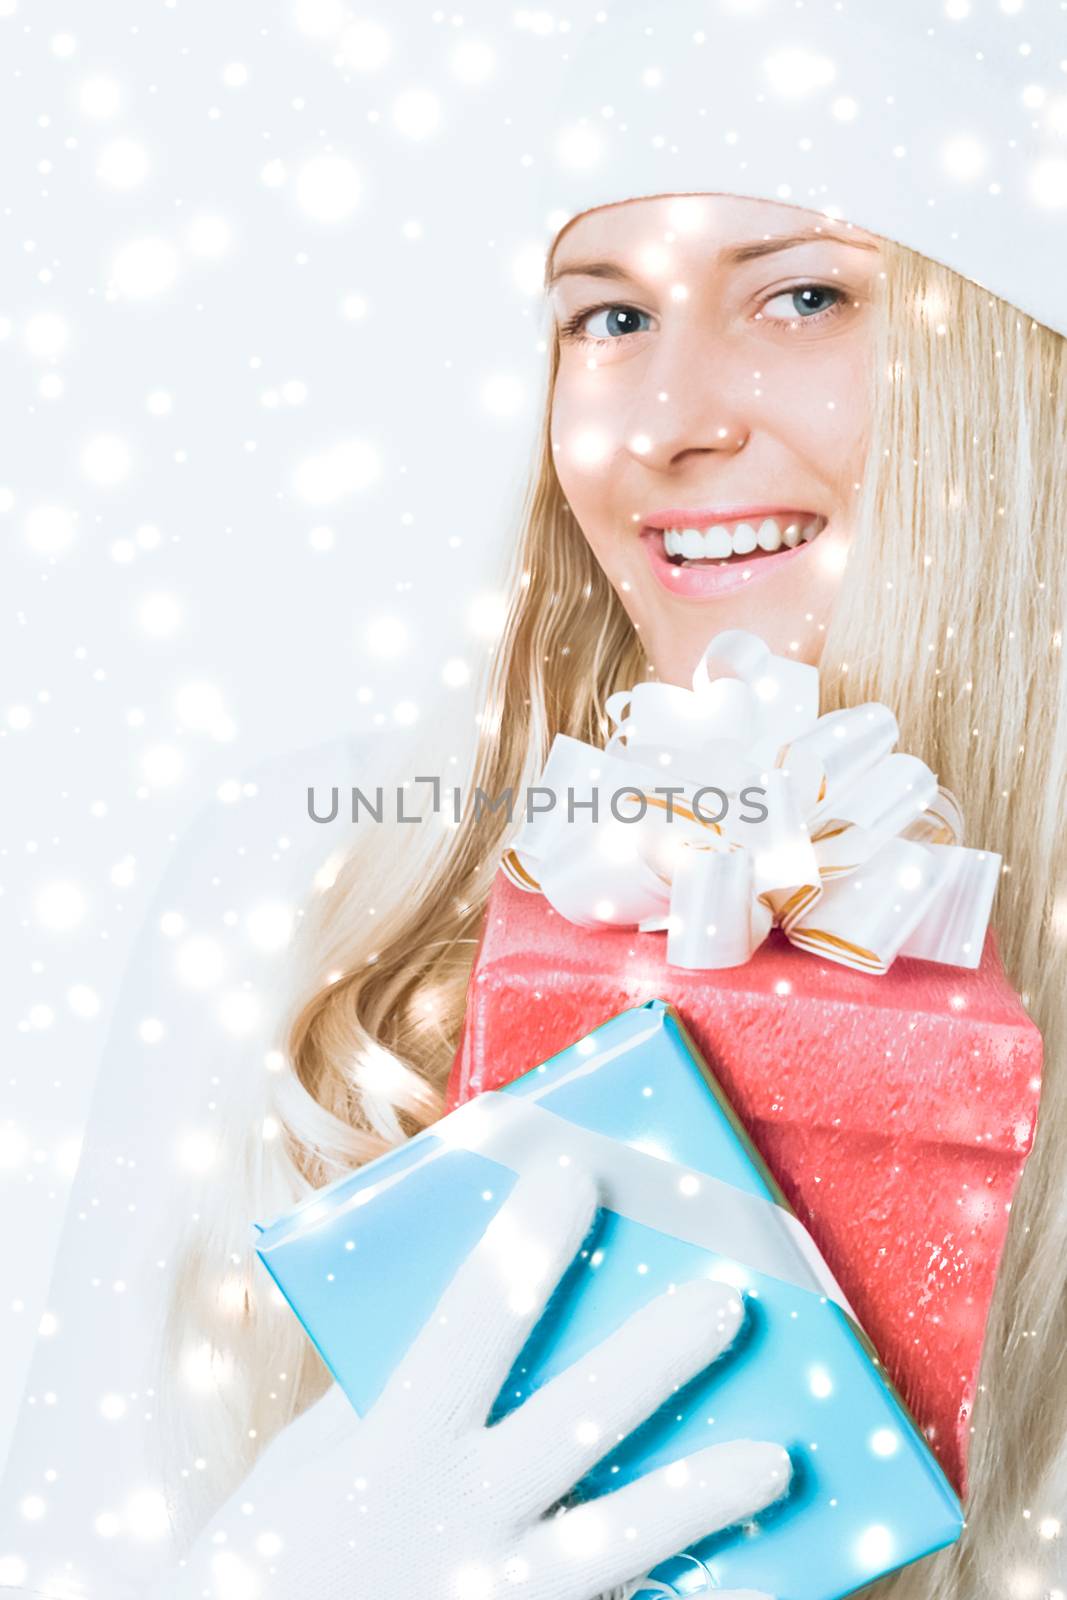 Young woman celebrating Christmas time, happy smiles